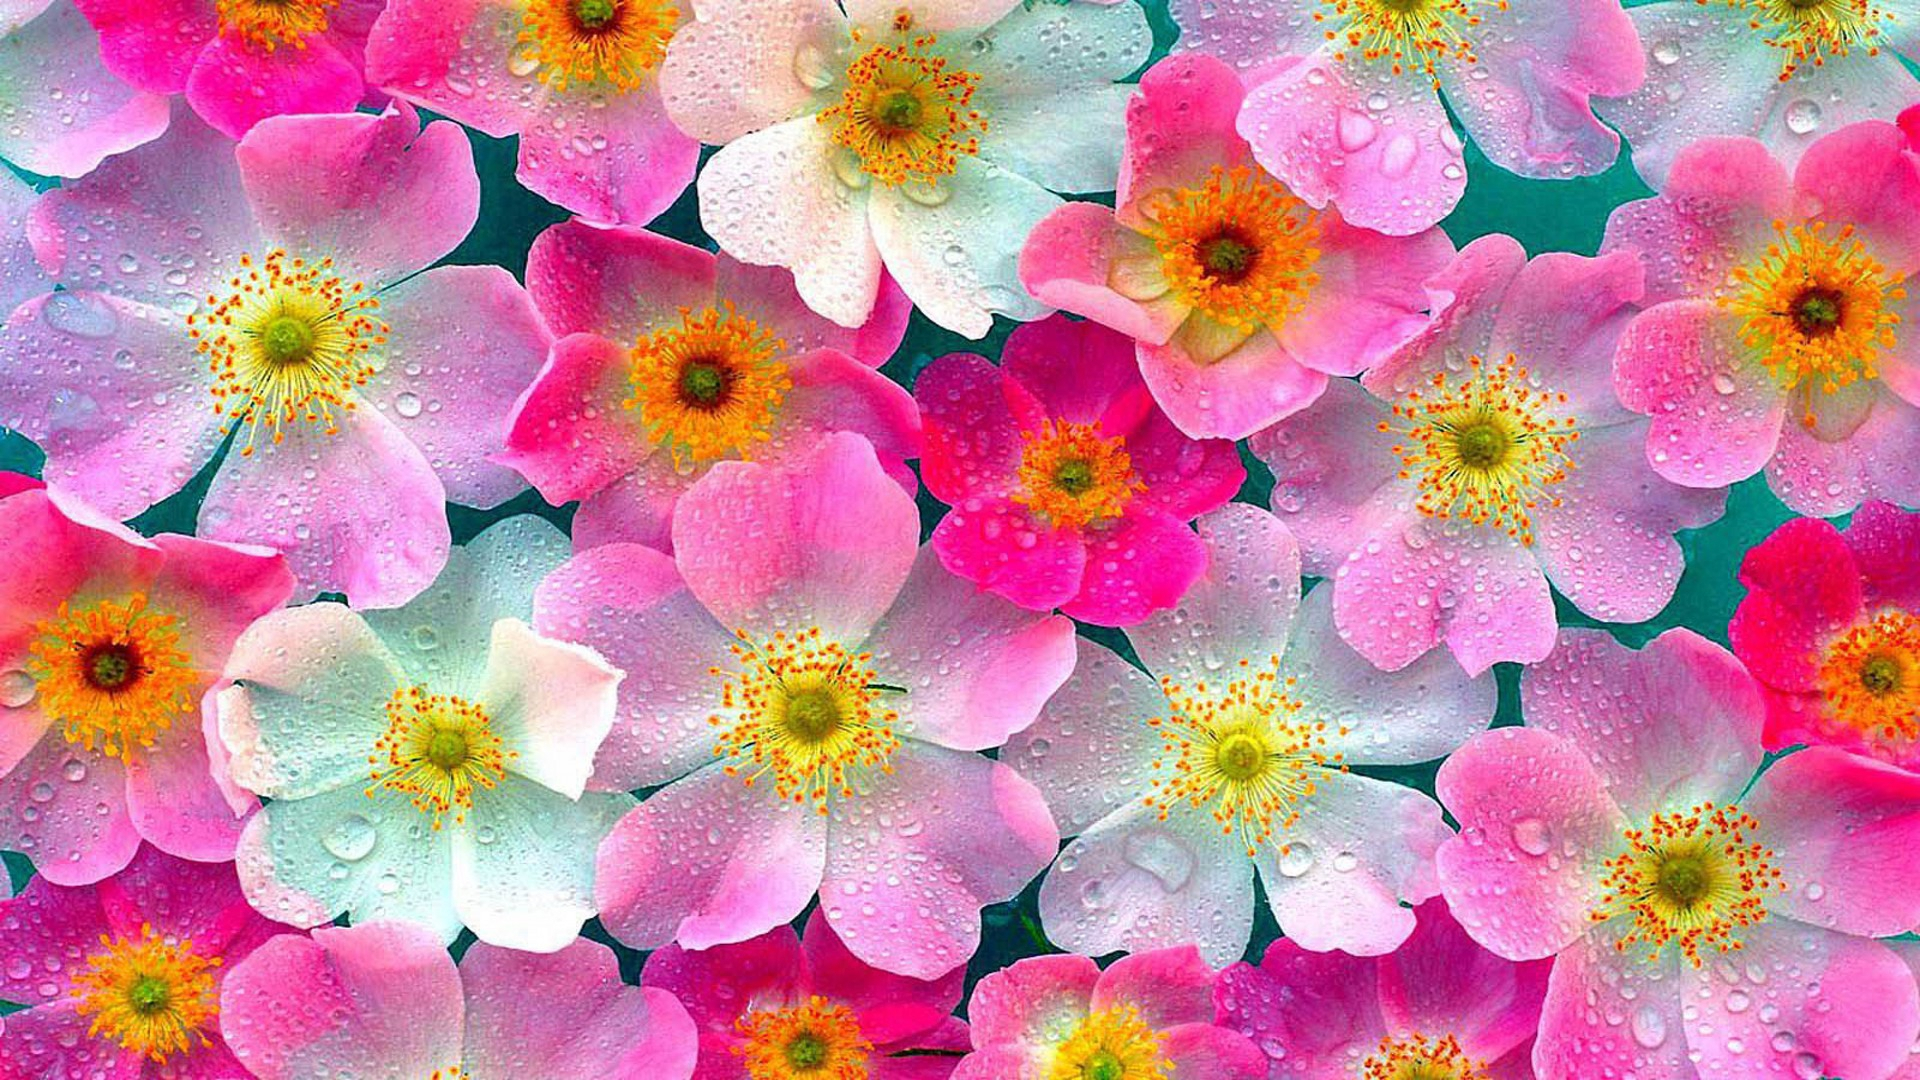 Nature Flowers Wallpapers Images Photos Pictures Backgrounds intended for High Resolution Botanical Flowers